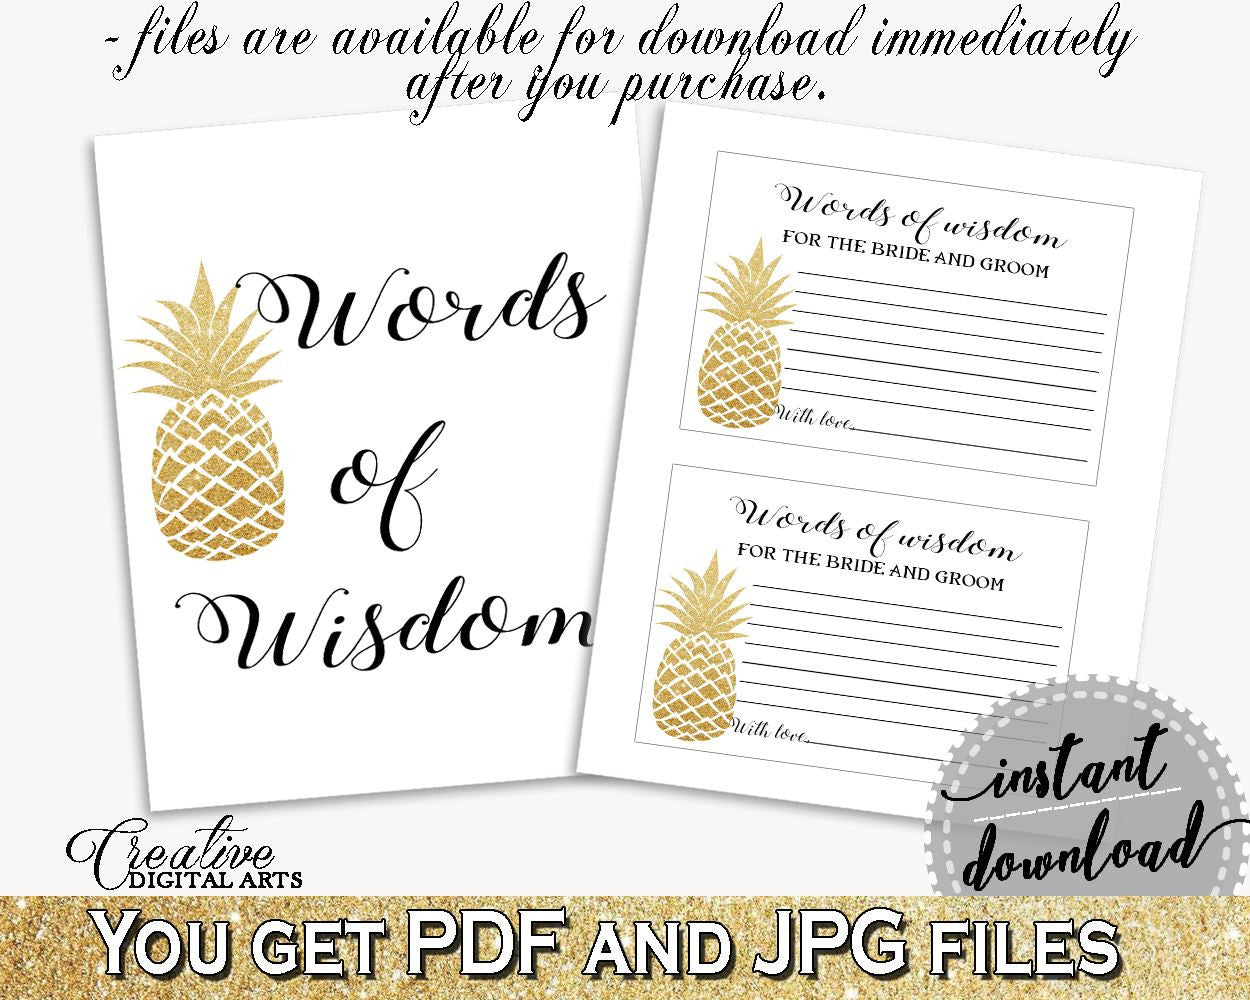 Words Of Wisdom For The Bride And Groom Bridal Shower Words Of Wisdom For The Bride And Groom Pineapple Bridal Shower Words Of Wisdom 86GZU - Digital Product